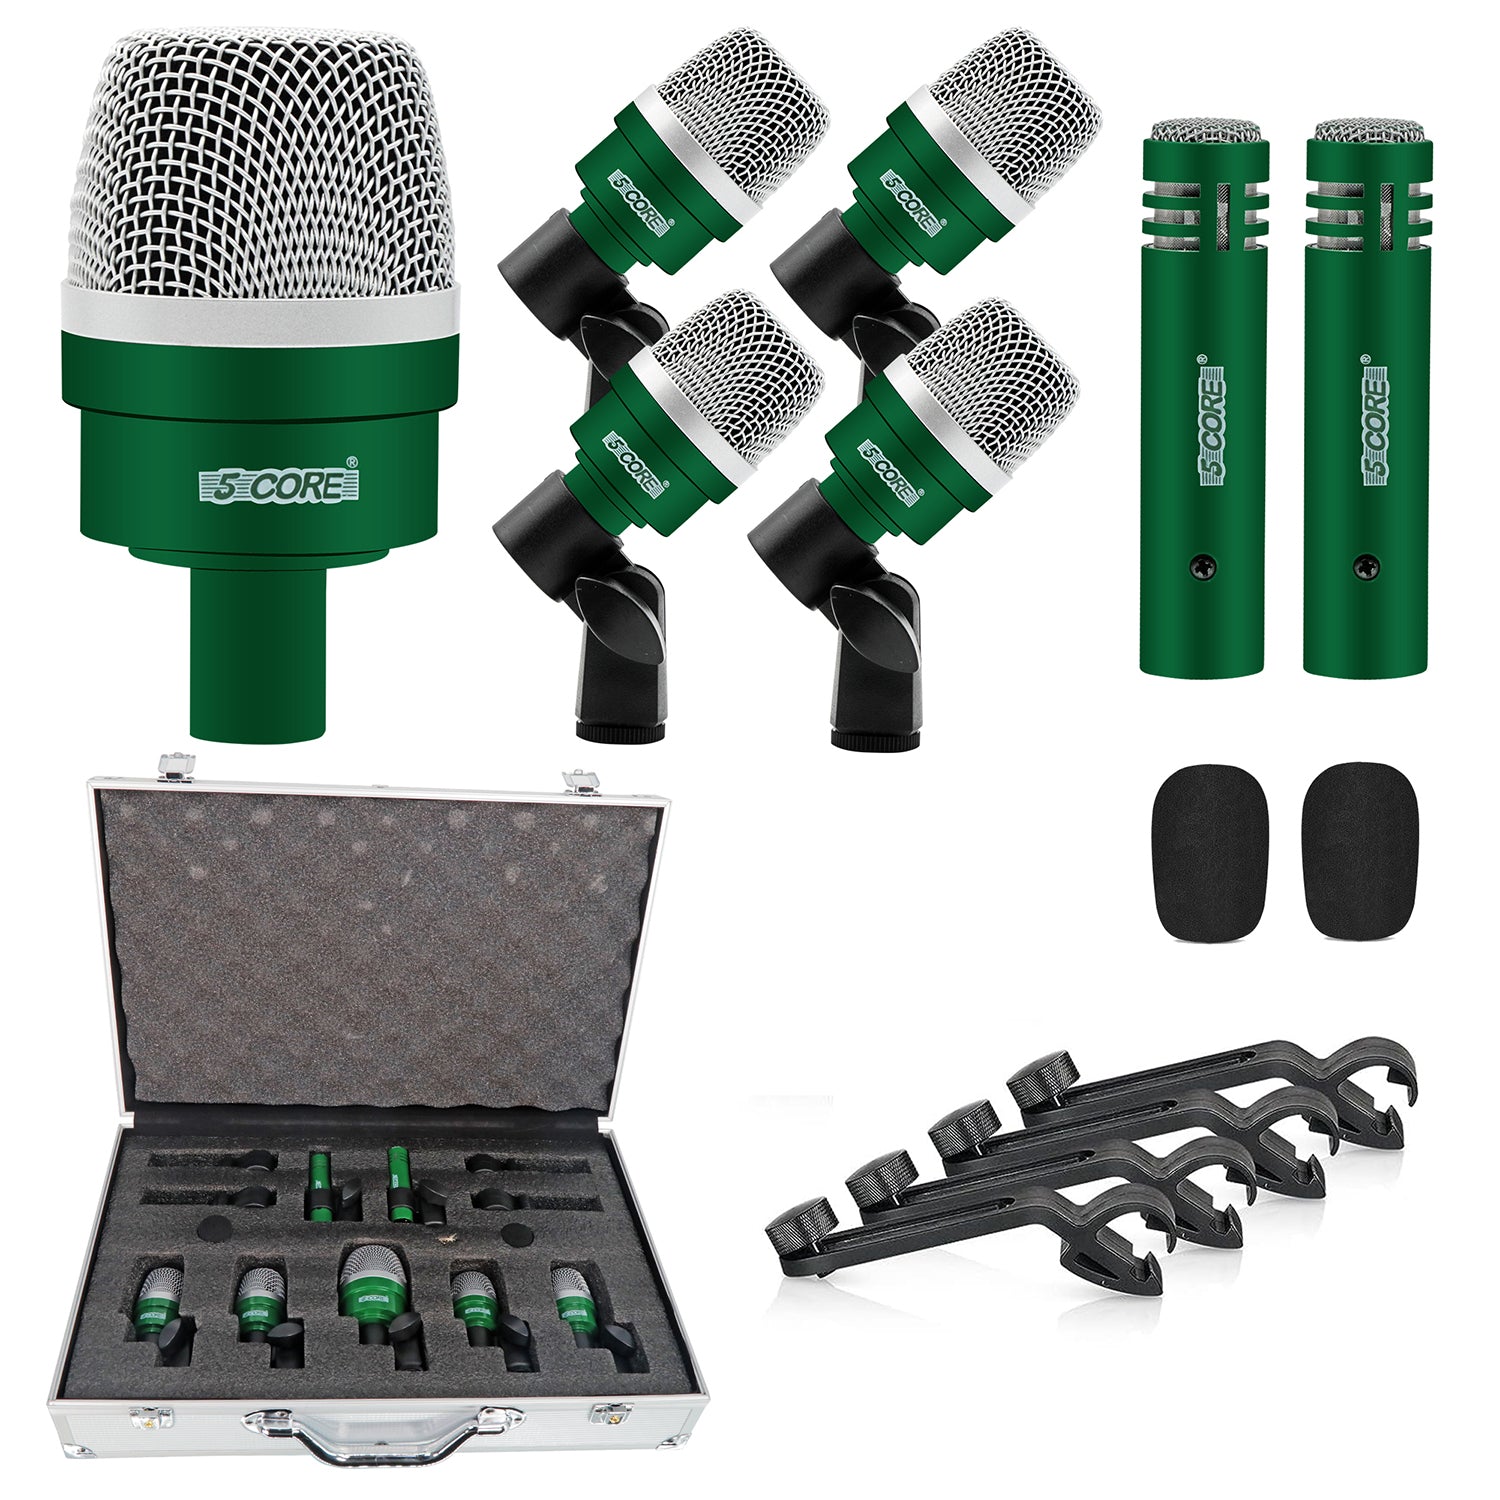 5 Core Drum Mic Kit 7 Piece Dynamic XLR Kick Bass Tom Snare Microphone Set for Drummers Green